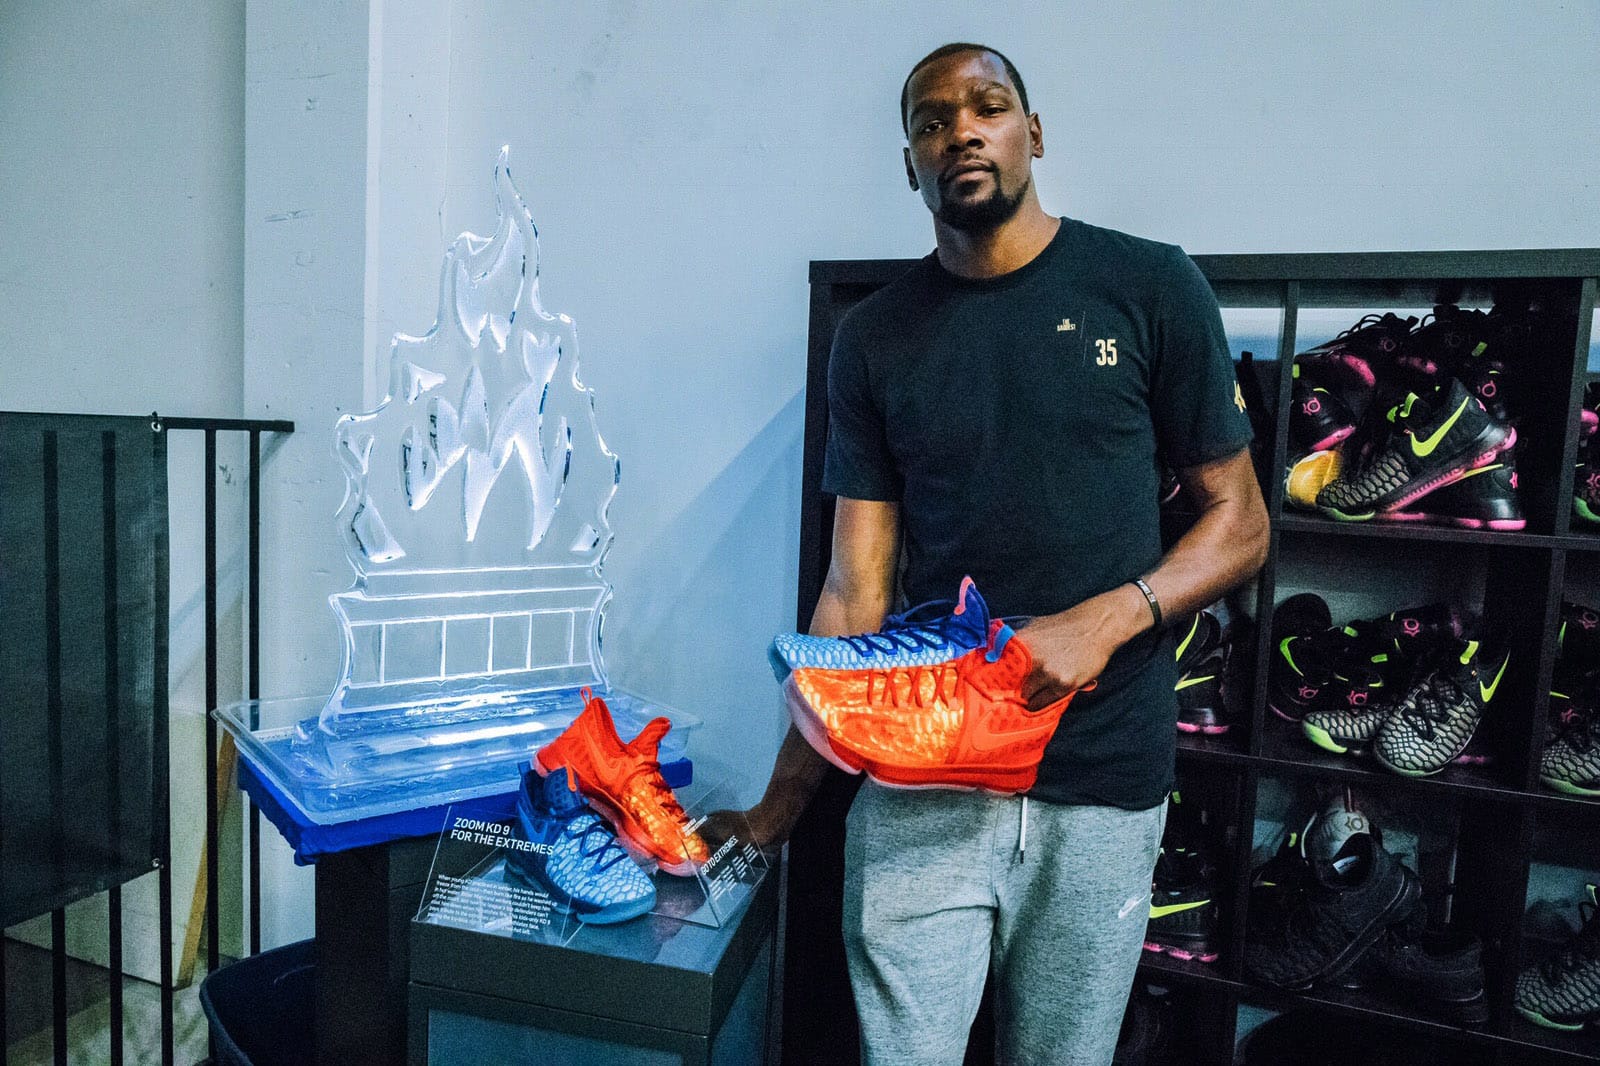 kd 10 fire and ice